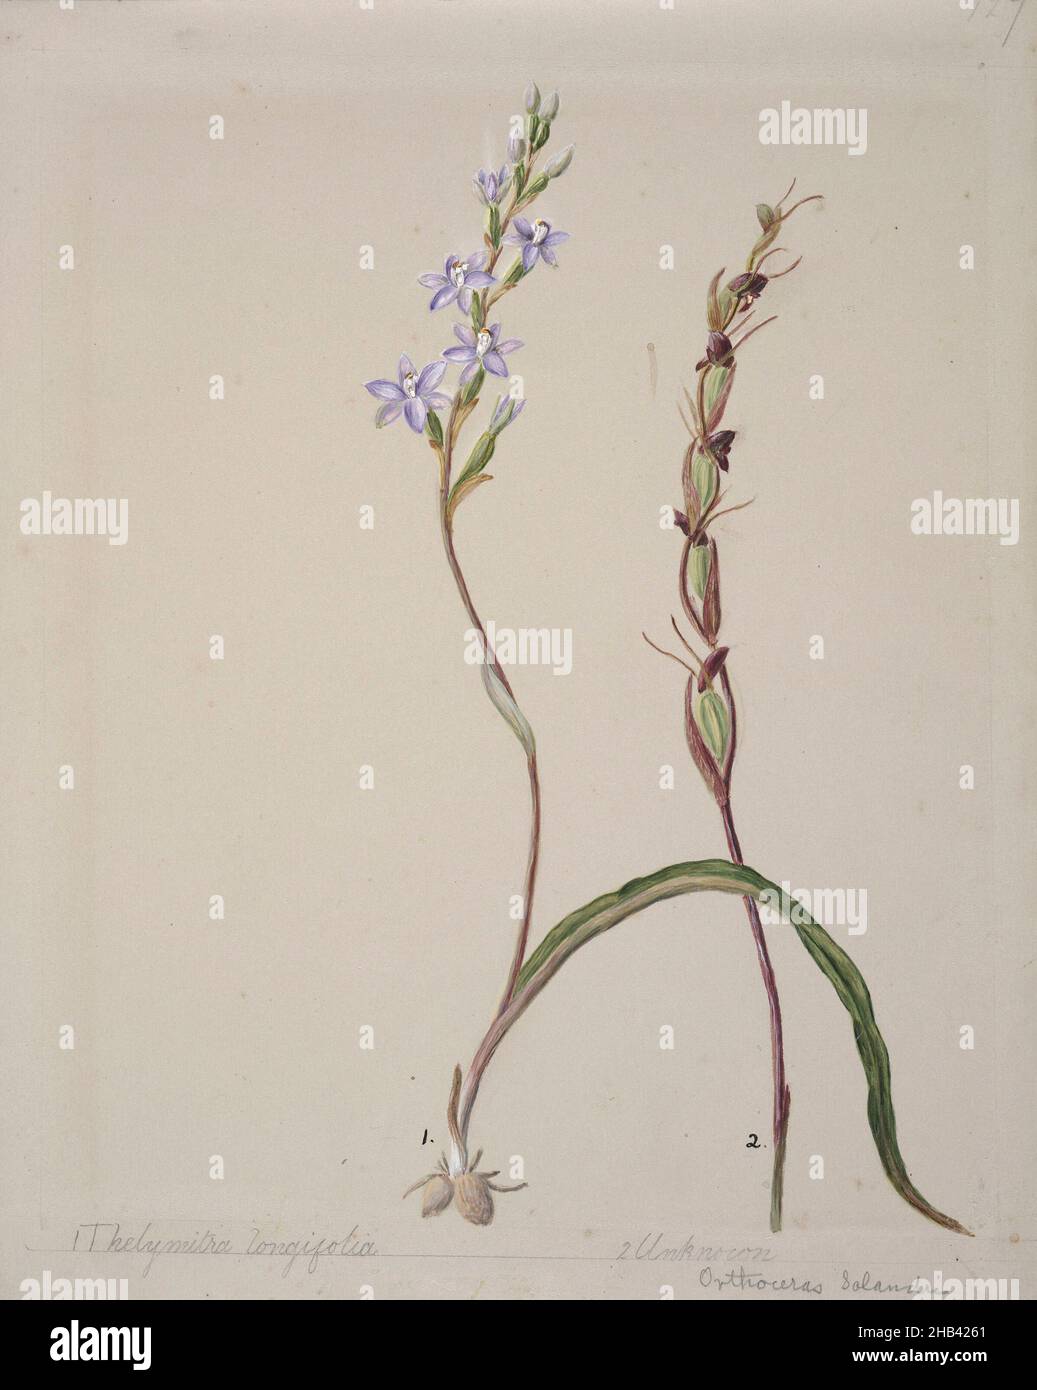 [Thelymitra longifolia], Sarah Featon, circa 1885, New Zealand, In 1889 Sarah Featon and her husband Edward Featon published The Art Album of New Zealand Flora, in which they sought to dispute the ‘mistaken notion that New Zealand is peculiarly destitute of native flowers’. While the title emphasises the artistic nature of their enterprise, in the preface they describe the choice they made between selecting a handful of the ‘best and most showy representatives of indigenous flowers’ and publishing them in a ‘haphazard manner, with just a soupcon of descriptive matter to serve as a garnish Stock Photo